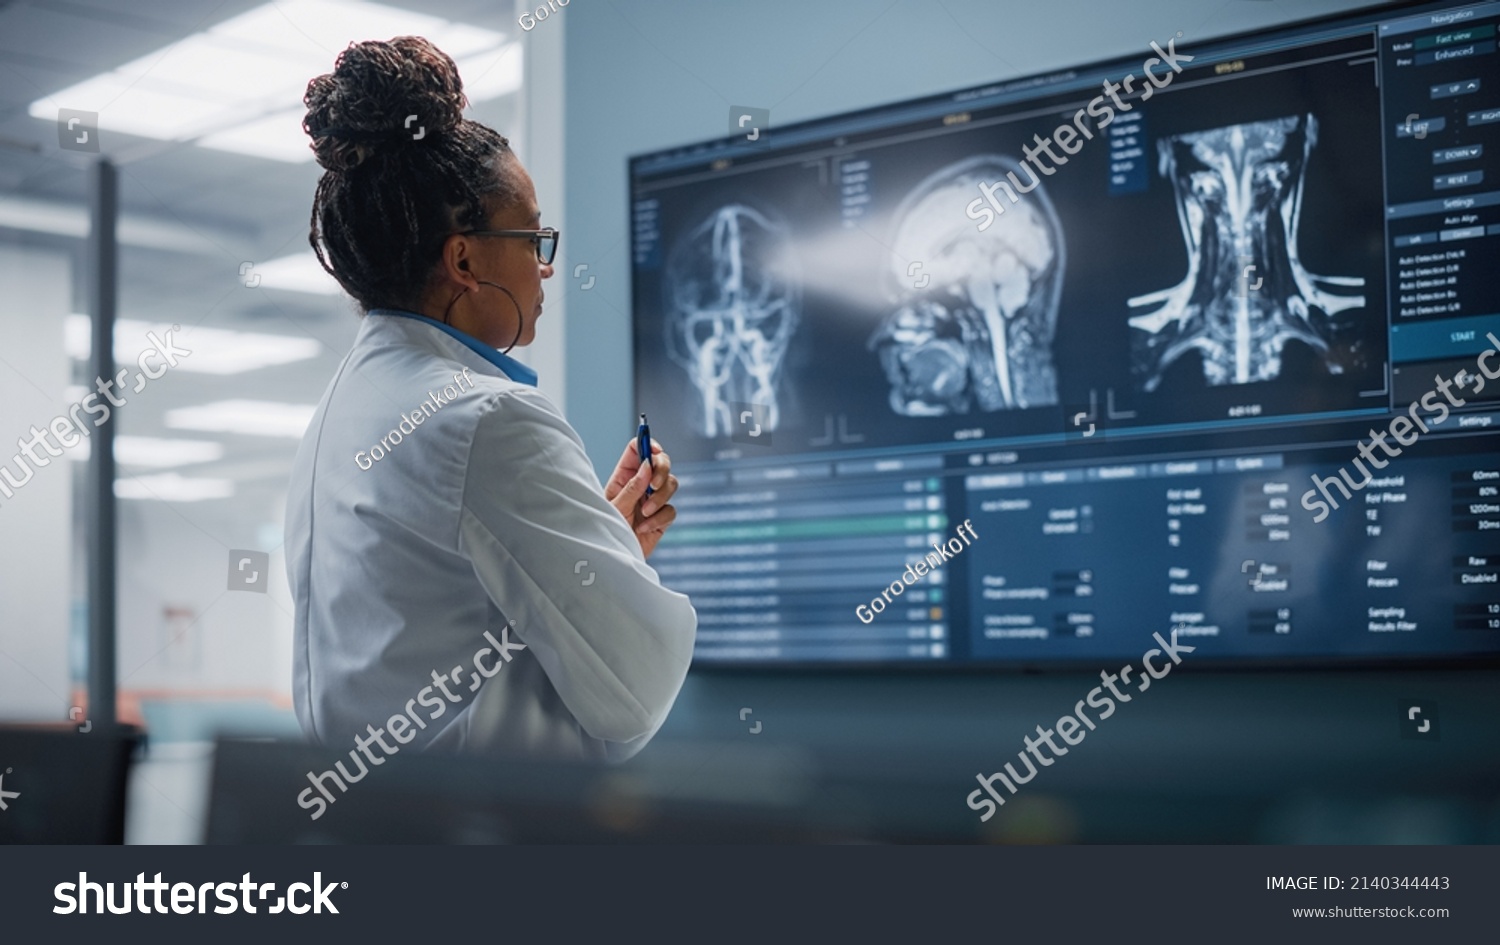 Medical Science Hospital: Confident Black Female Neurologist, Neuroscientist, Neurosurgeon, Looks at TV Screen with MRI Scan with Brain Images, Thinks about Sick Patient Treatment Method. Saving Lives #2140344443